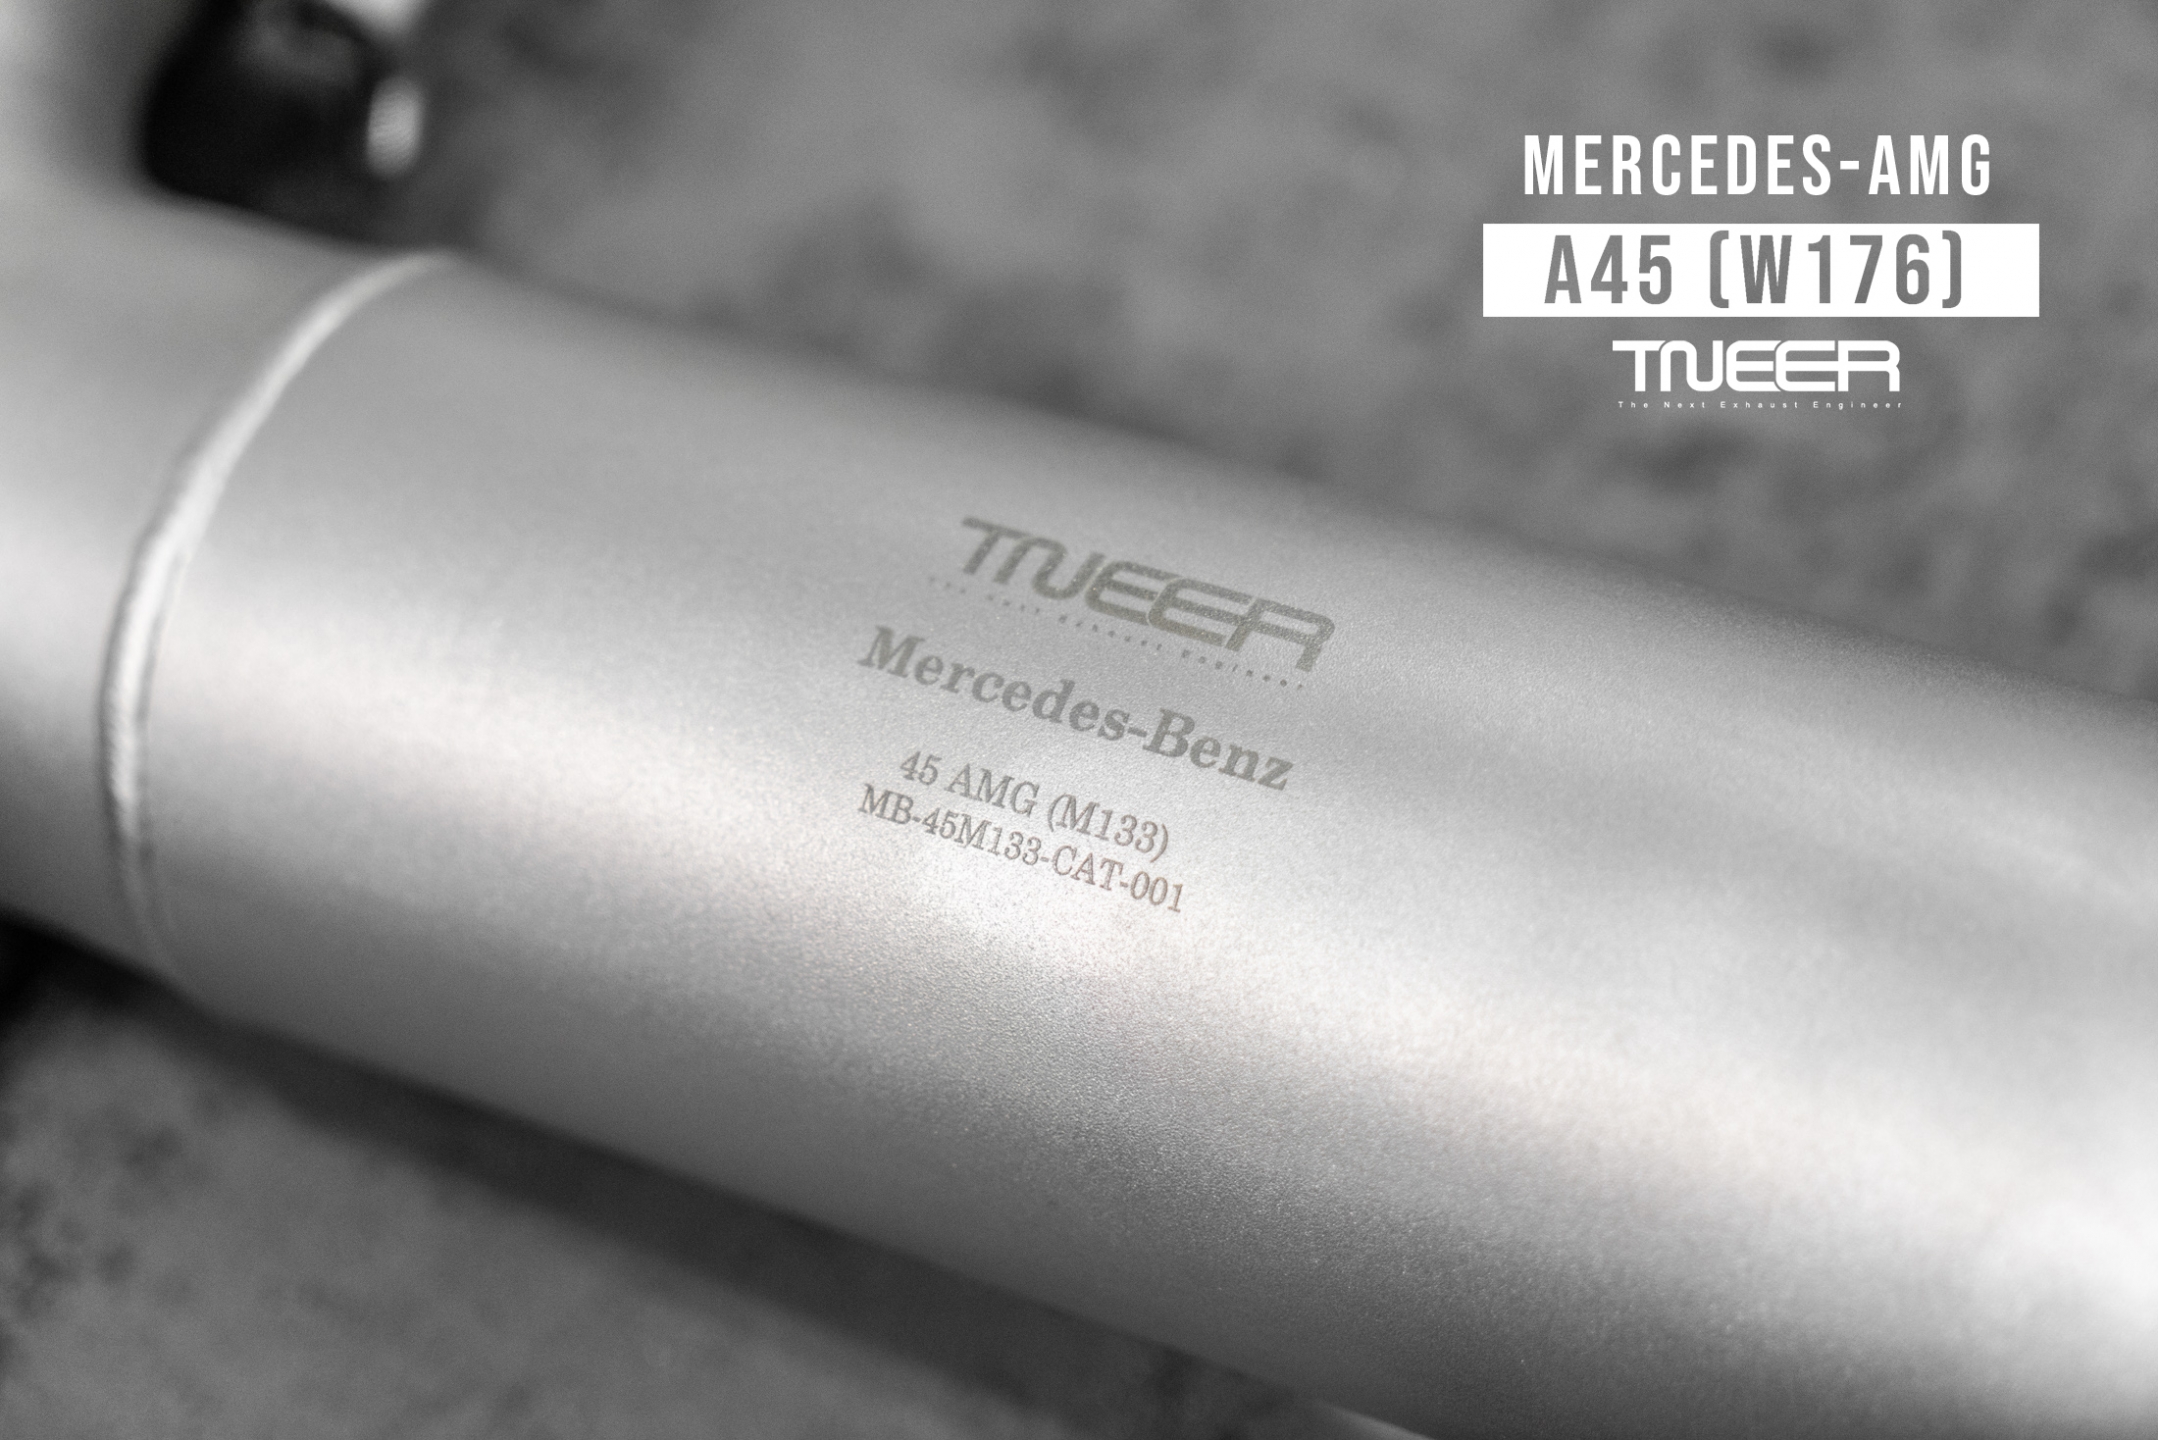 Mercedes-AMG W176 A45 TNEER High – Performance Downpipes